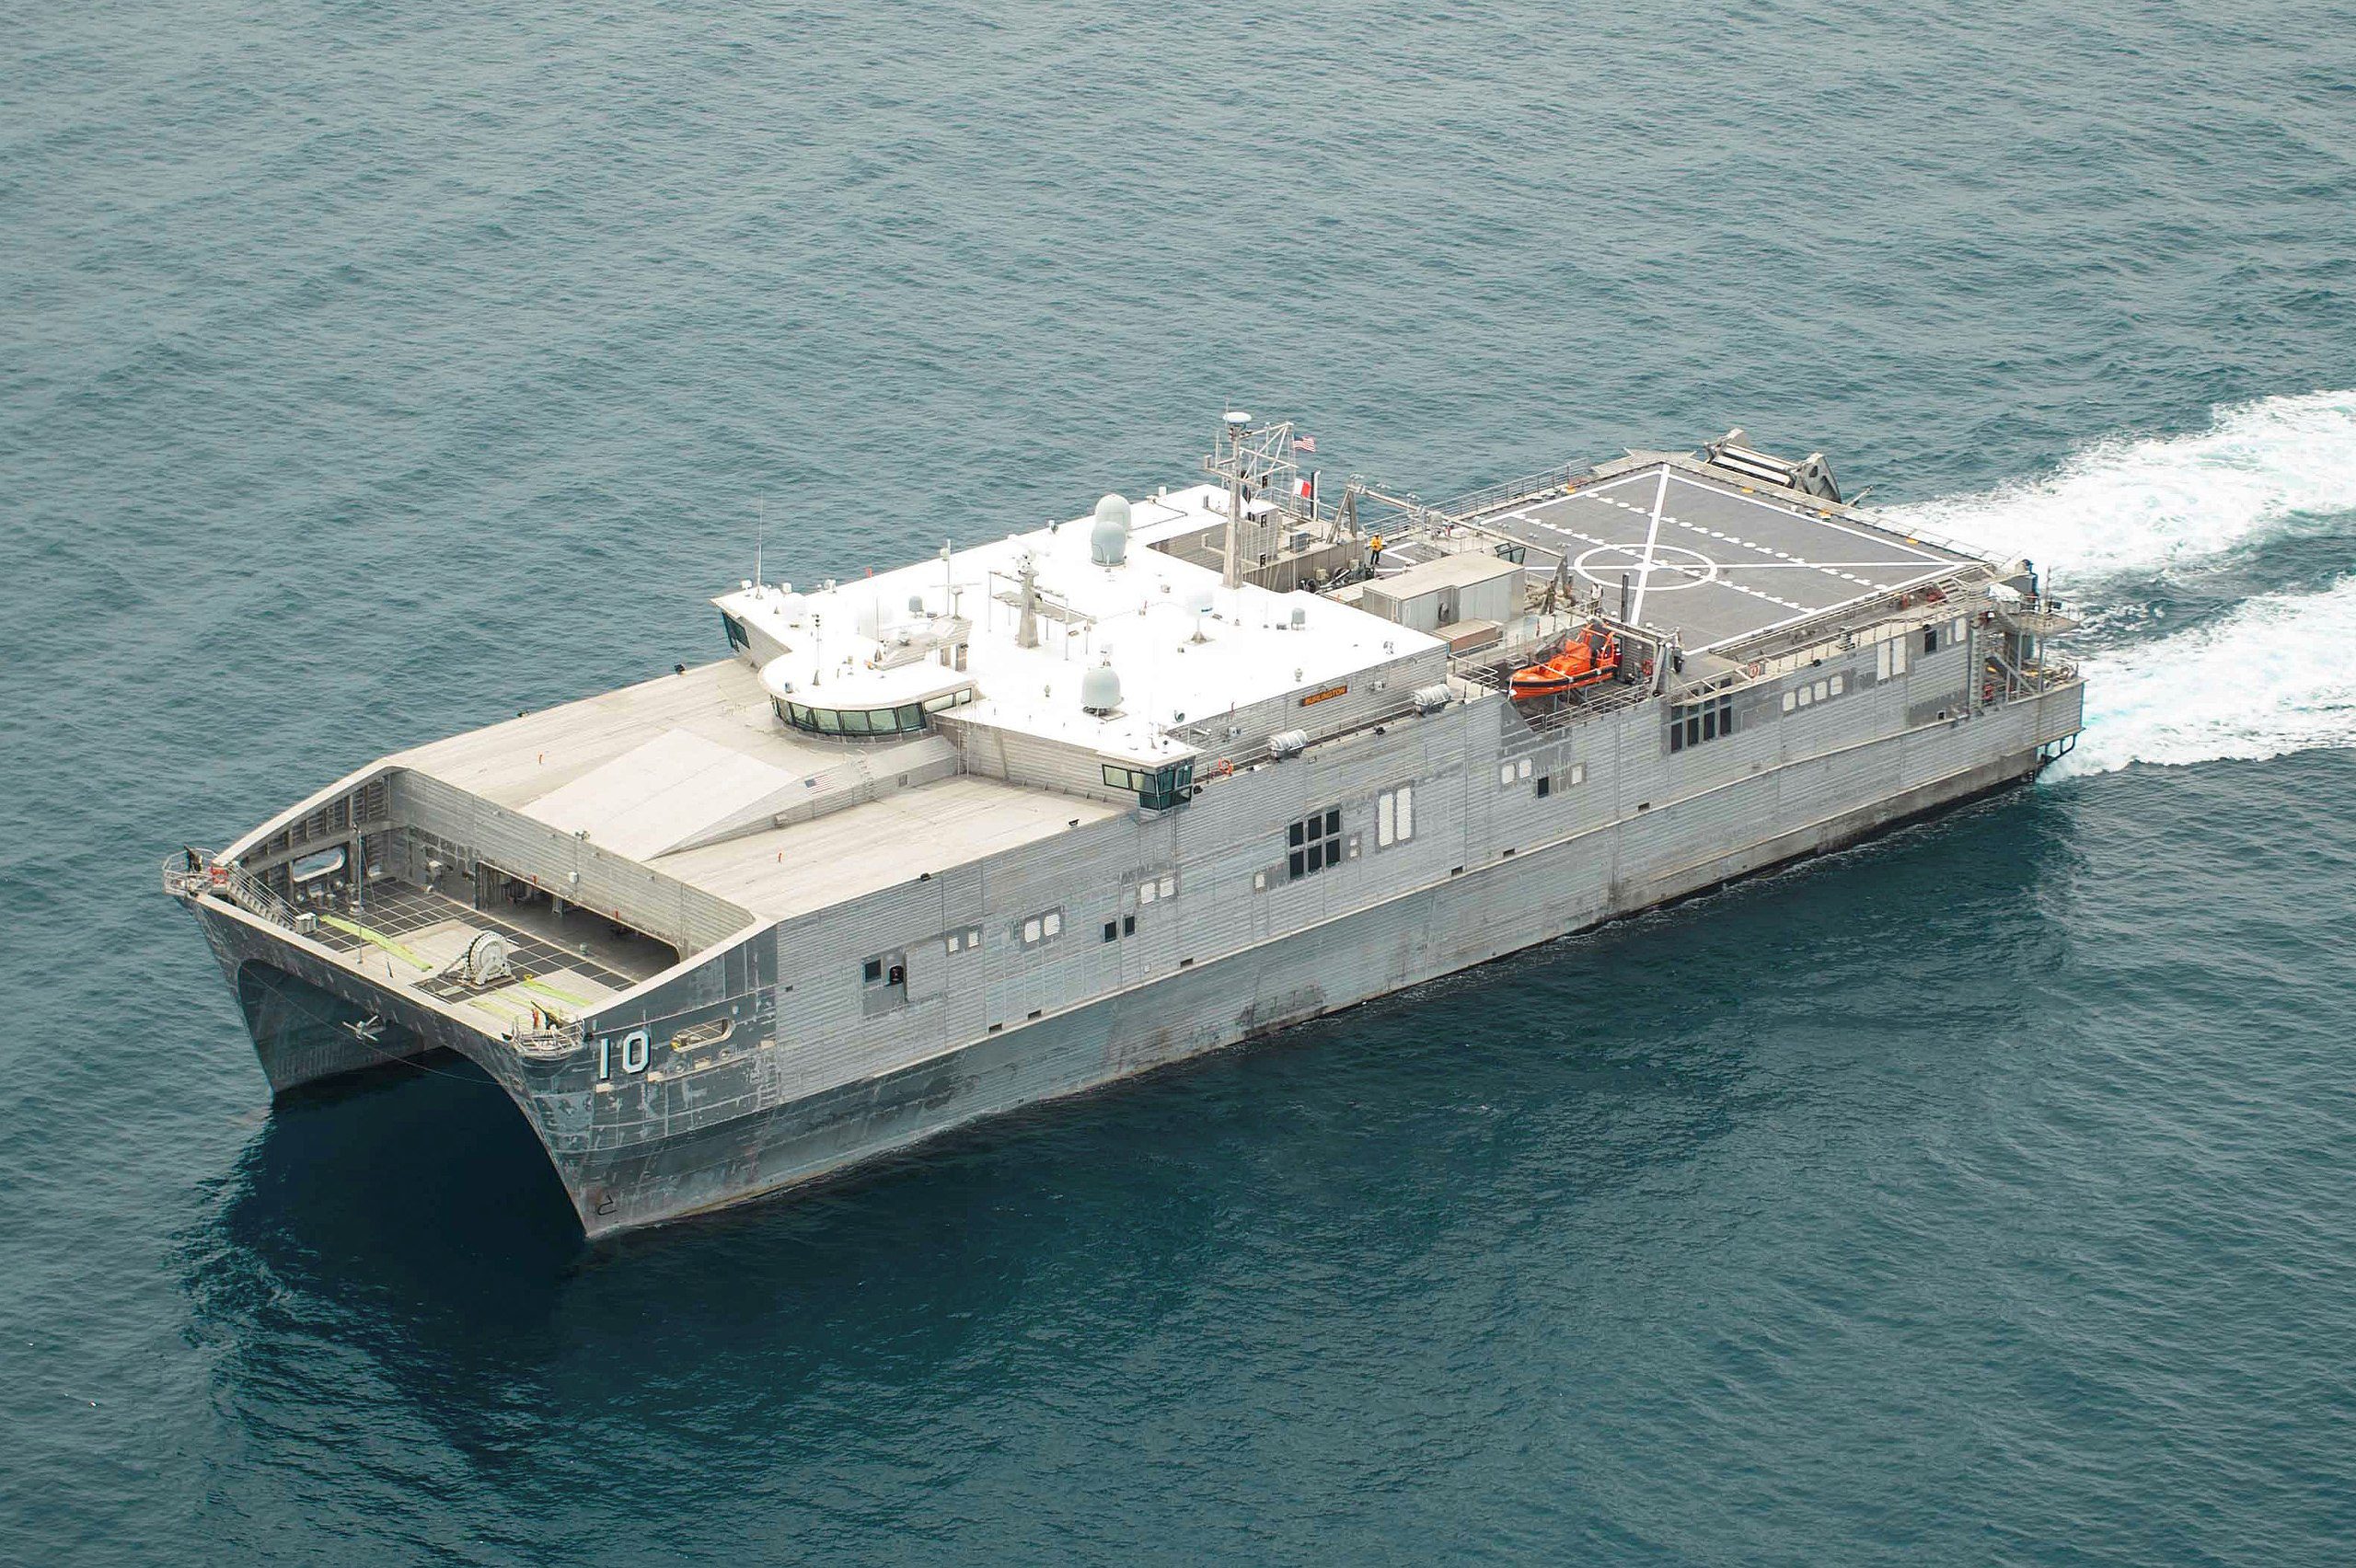 Future ‘USNS Apalachicola’ Could Become the Navy’s First Autonomous Ship